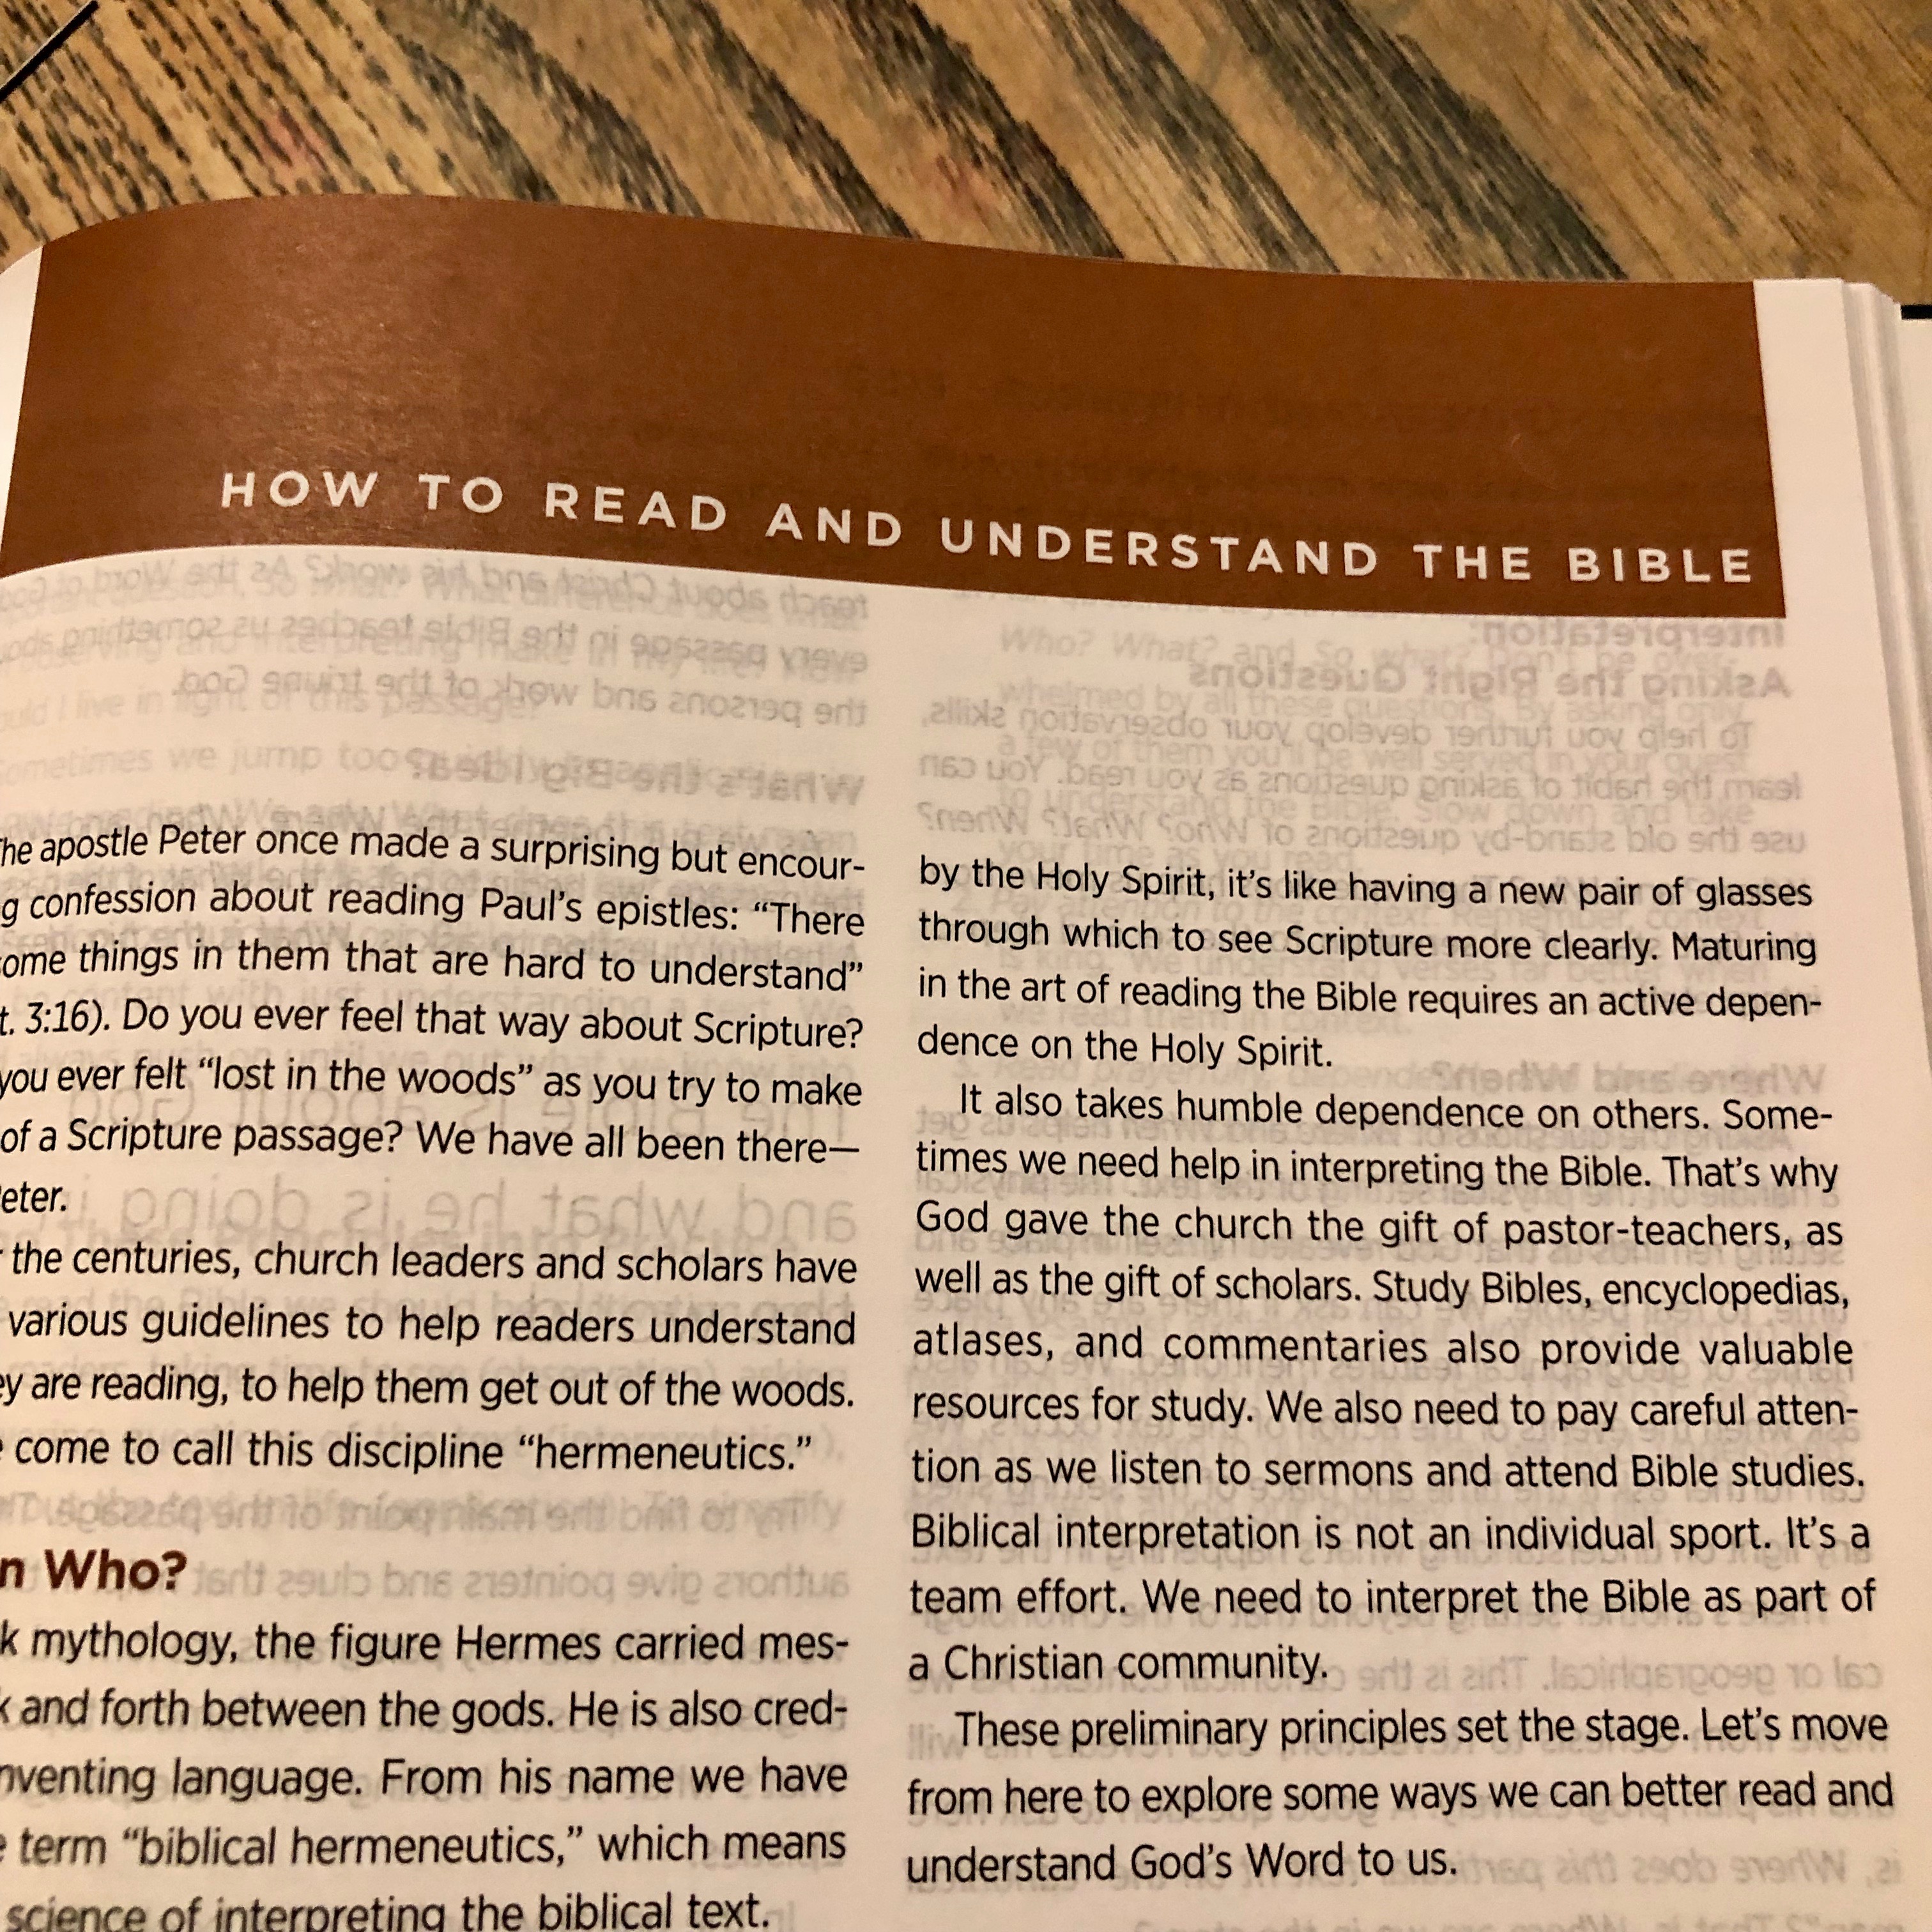 Article "How to Read the Bible" 